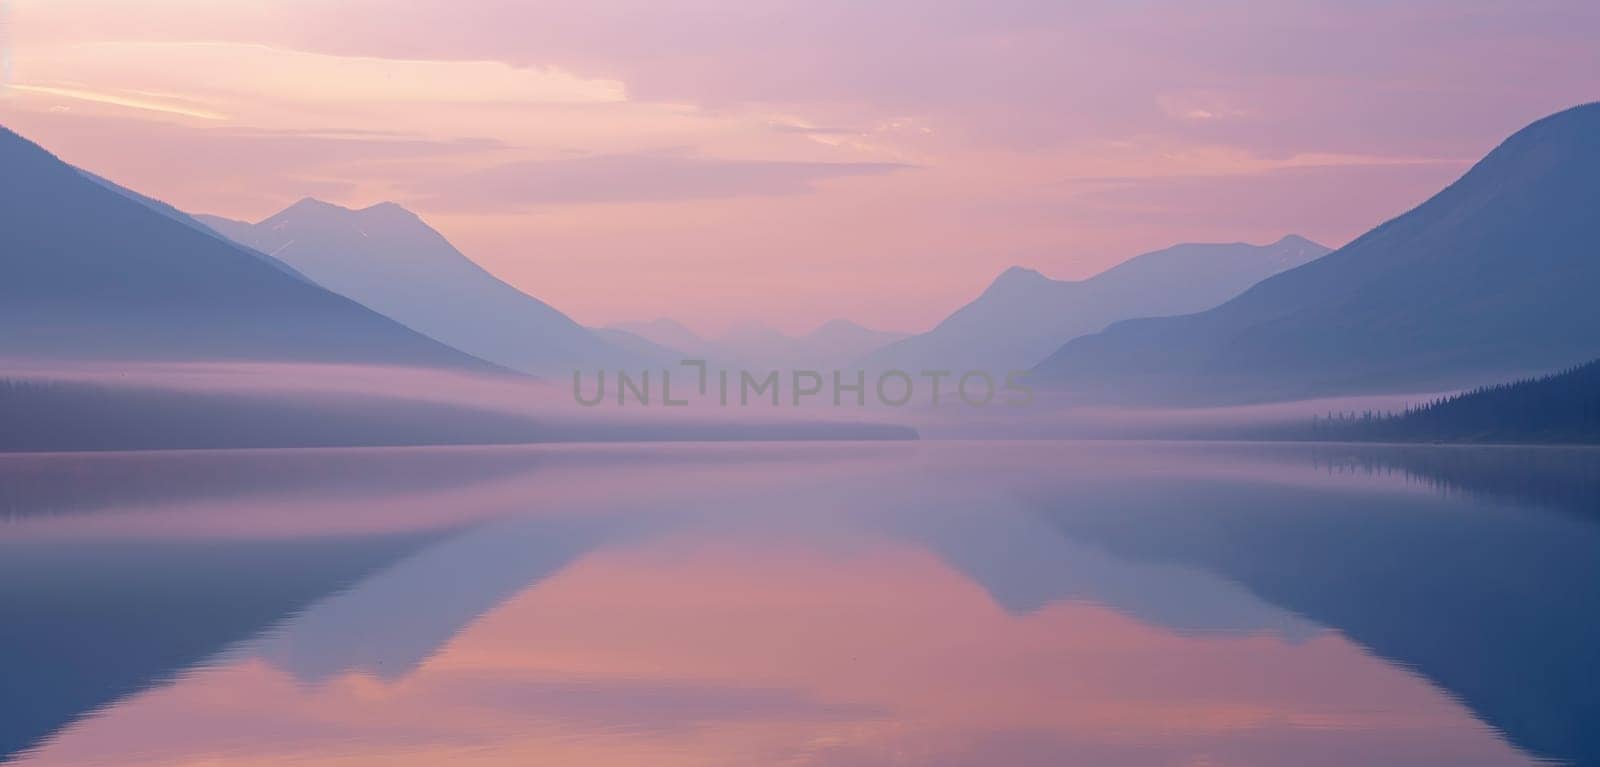 Stunning sunset over a calm lake reflecting vibrant hues of pink and orange mountains